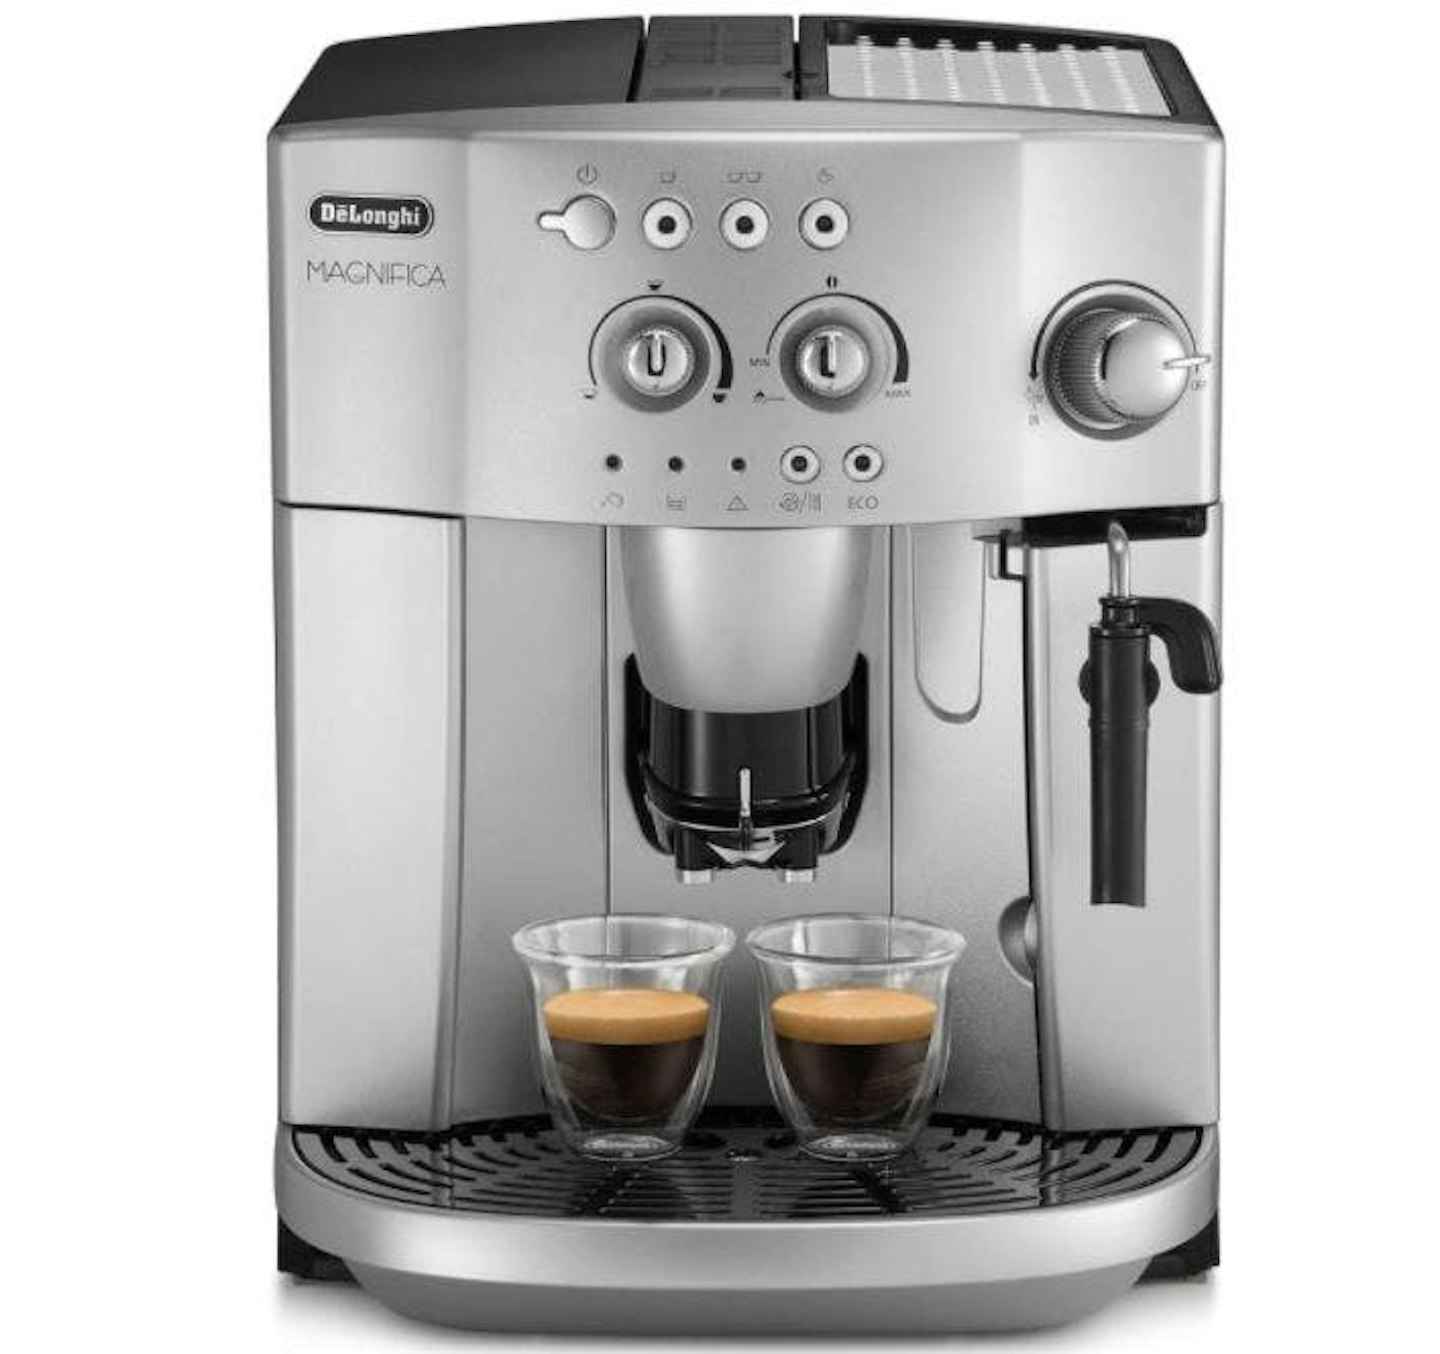 The best bean-to-cup coffee machines: De'Longhi Magnifica